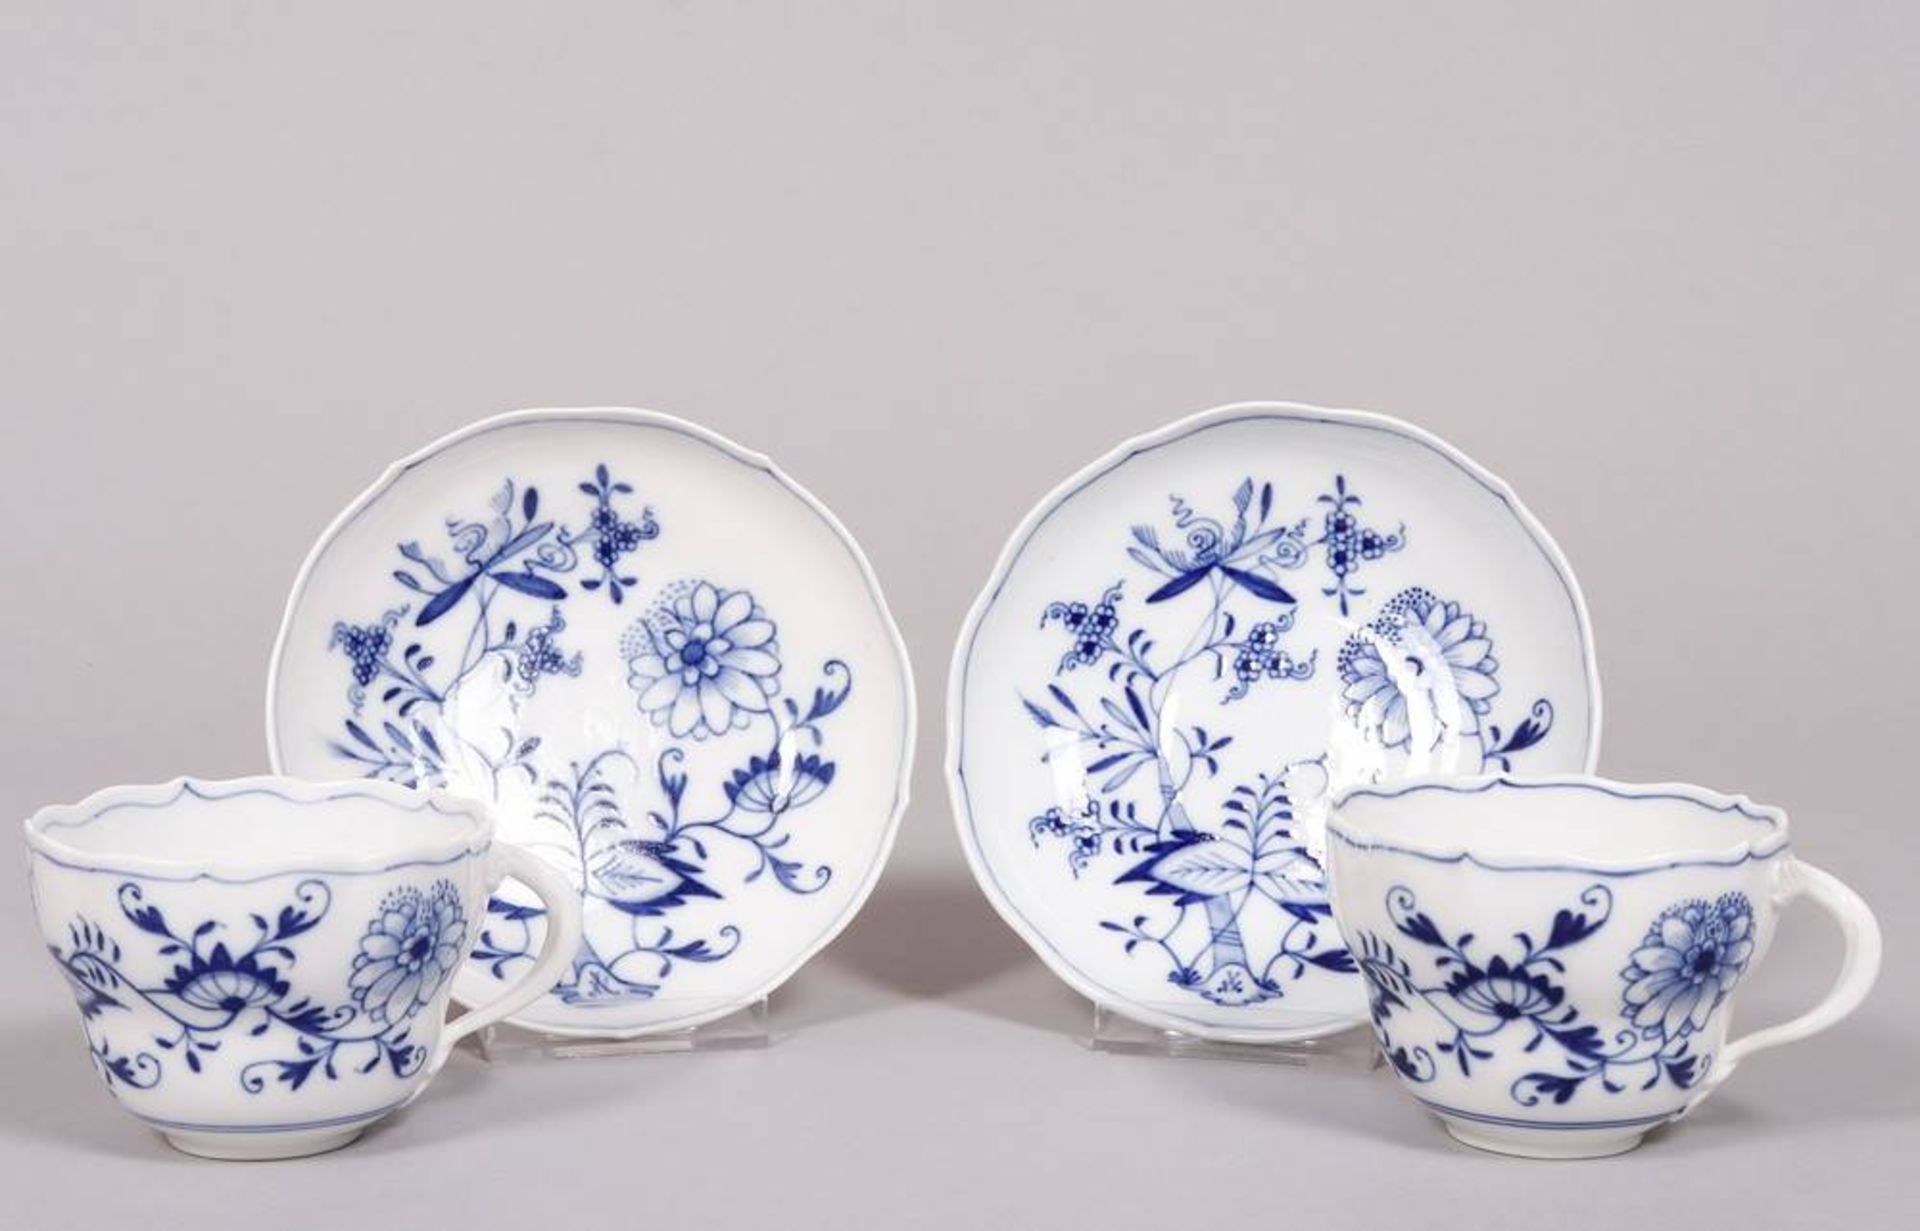 4 cups and saucers, Meissen, c. 1900 - Image 2 of 8